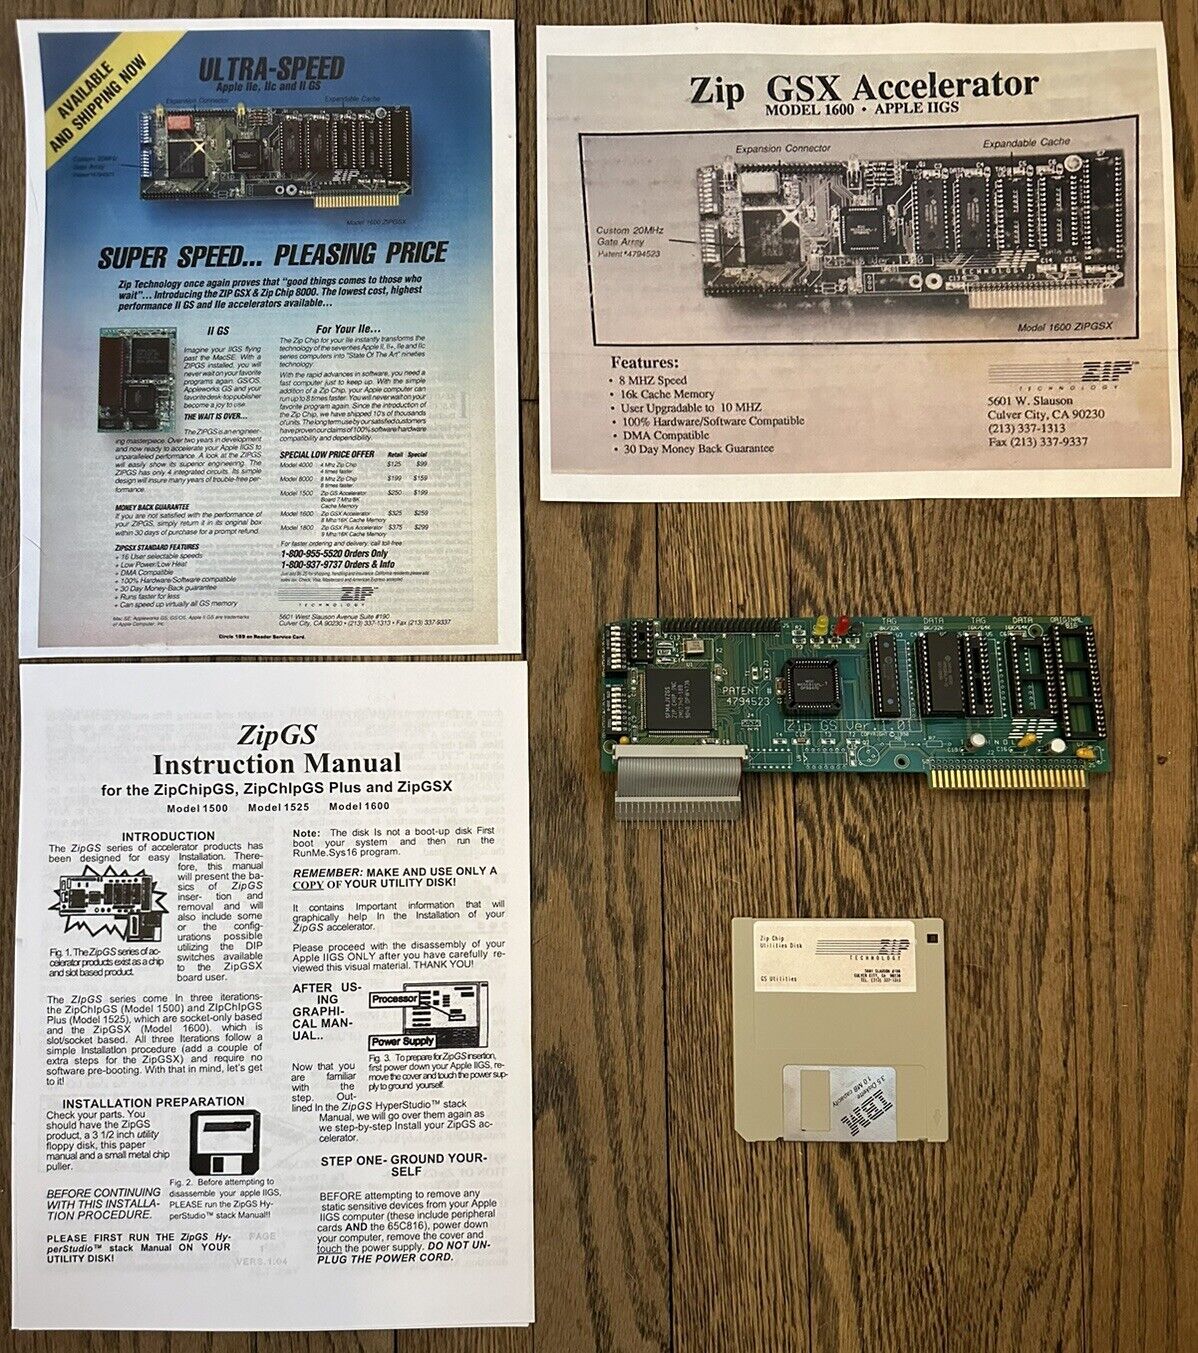 Vintage ZipGSX Ver. 1.01 Accelerator For The Apple IIGS Computer w/ Utility Disk